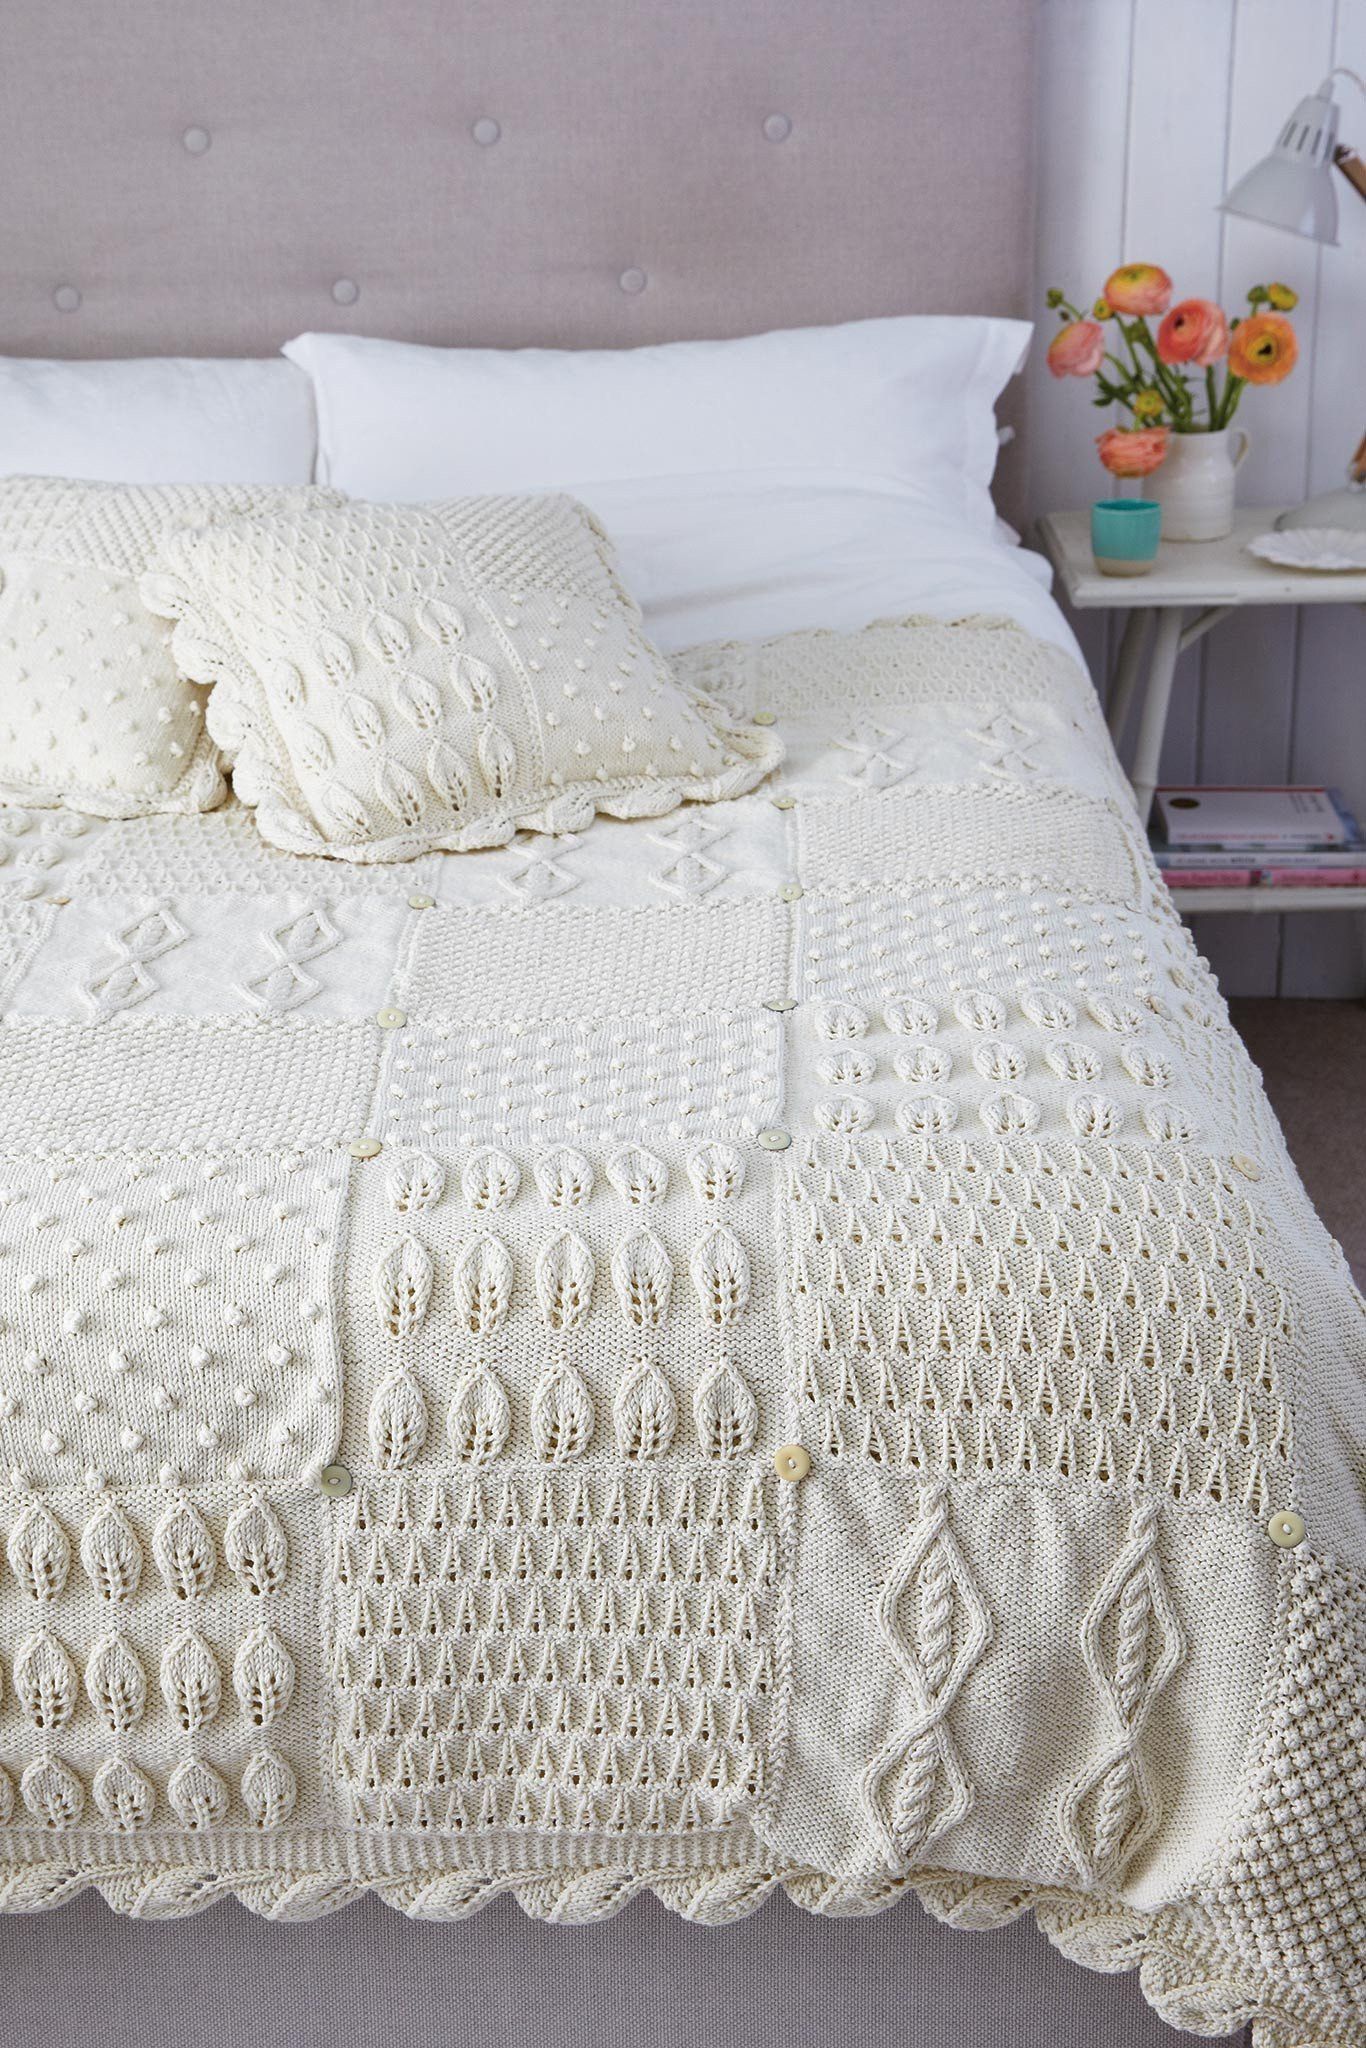  Knitting Pattern Bed Topper And Cushion Knitting Patterns